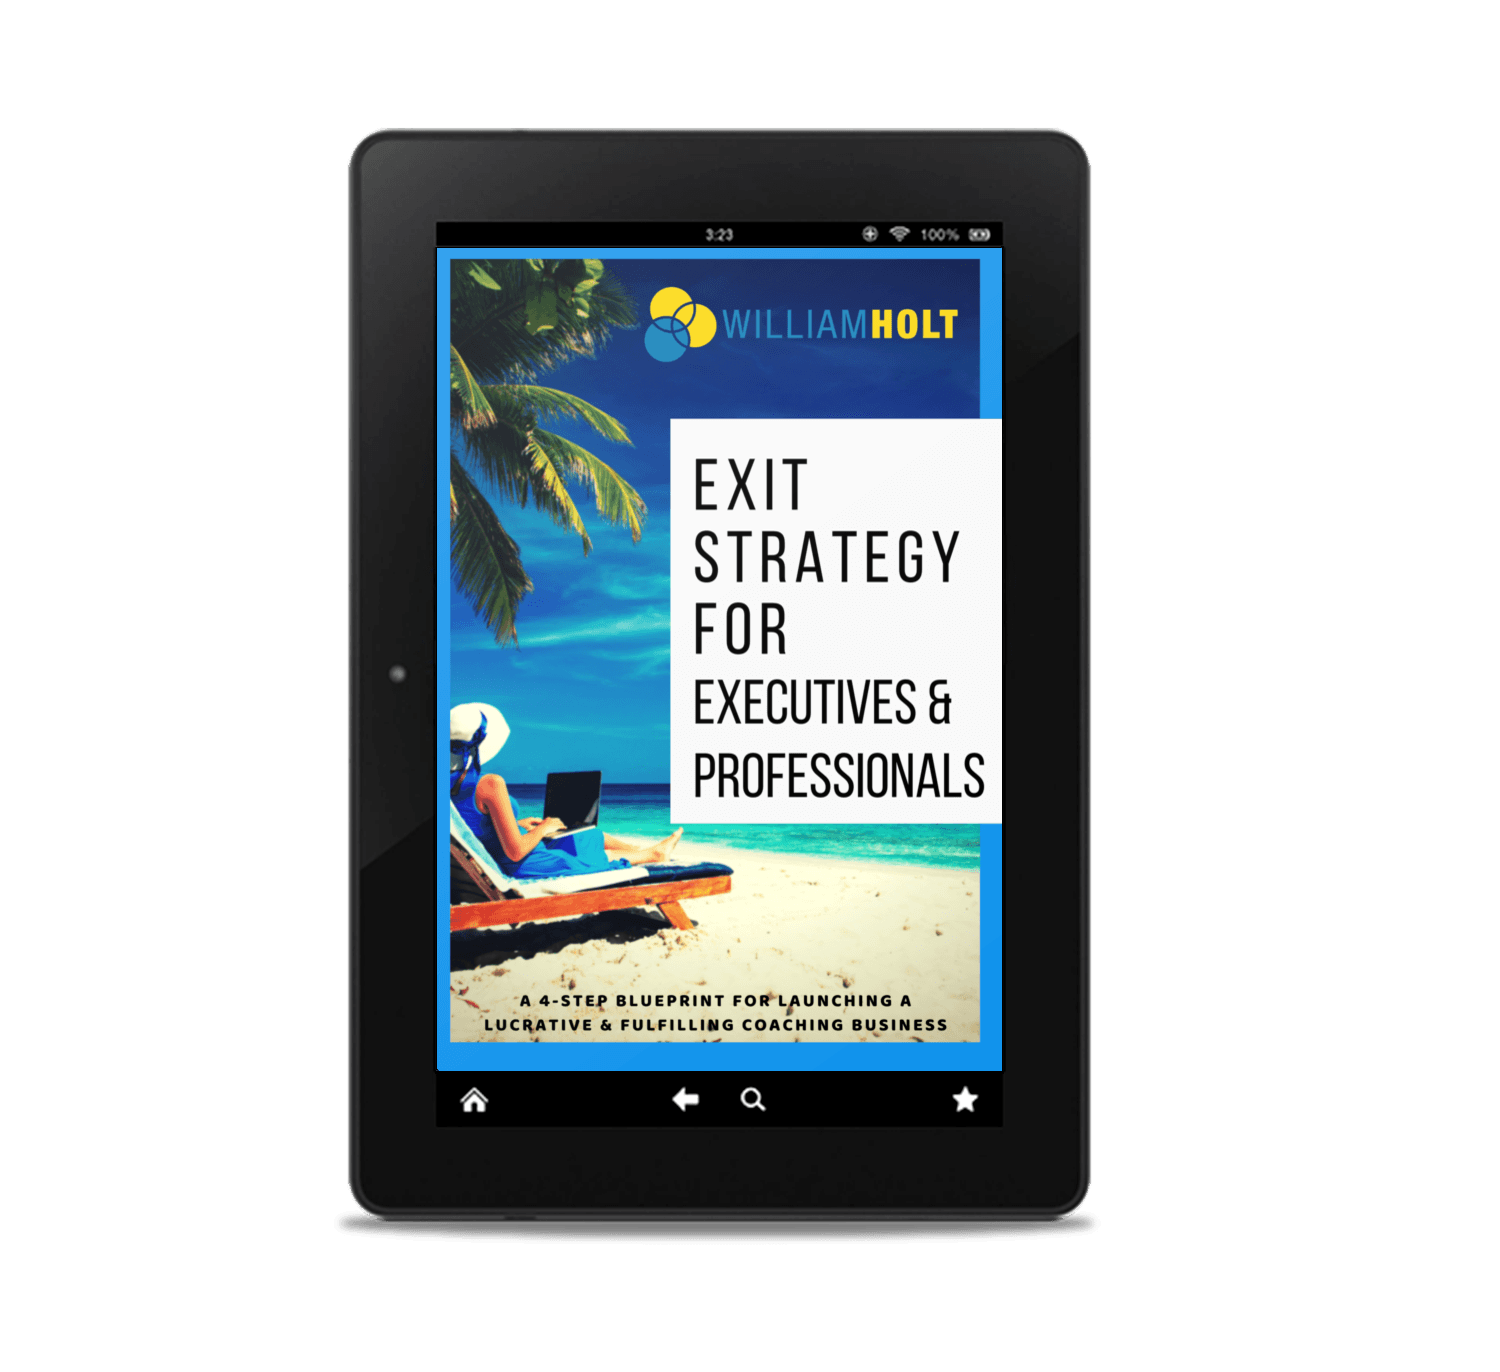 Exit strategy for executives and professionals